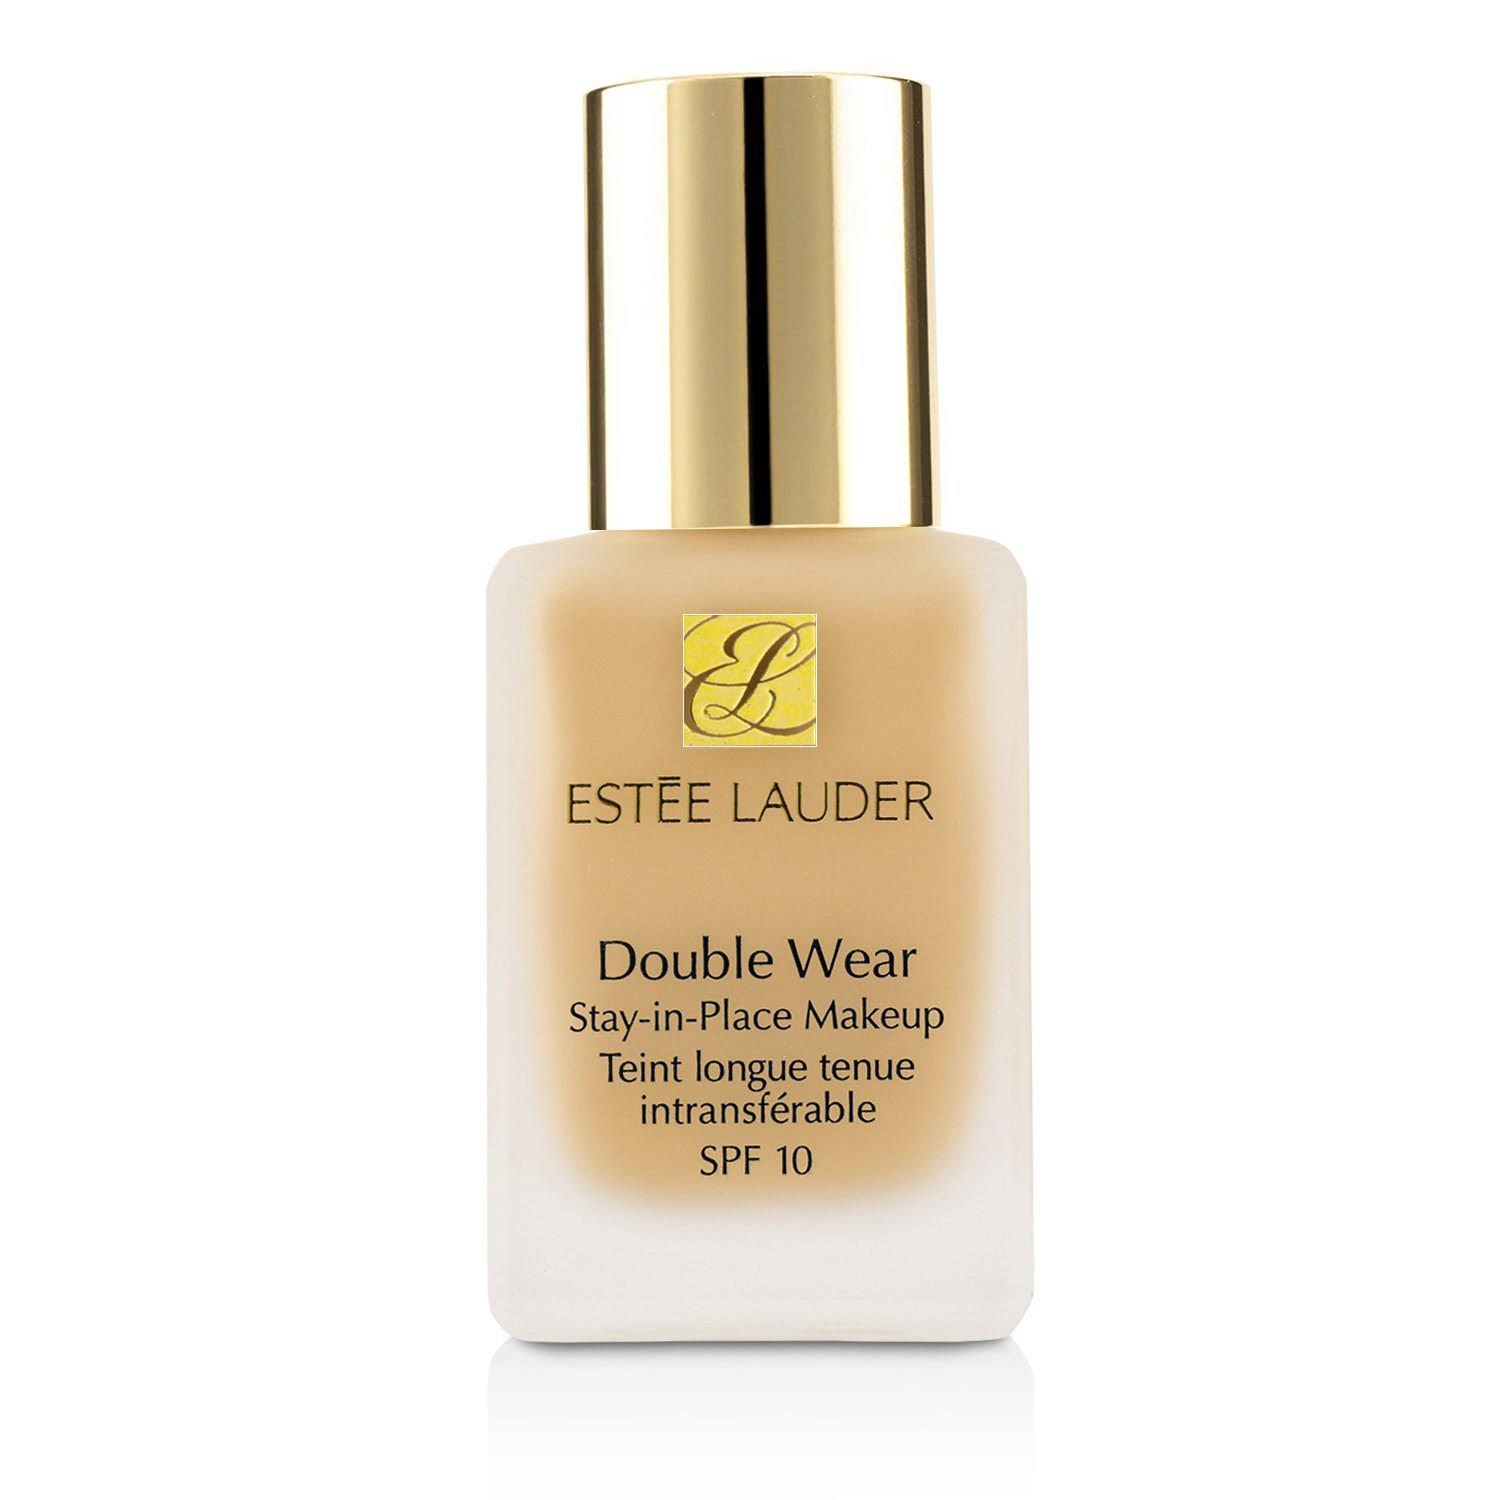 Estee Lauder Double Wear Stay-In-Place Makeup SPF 10